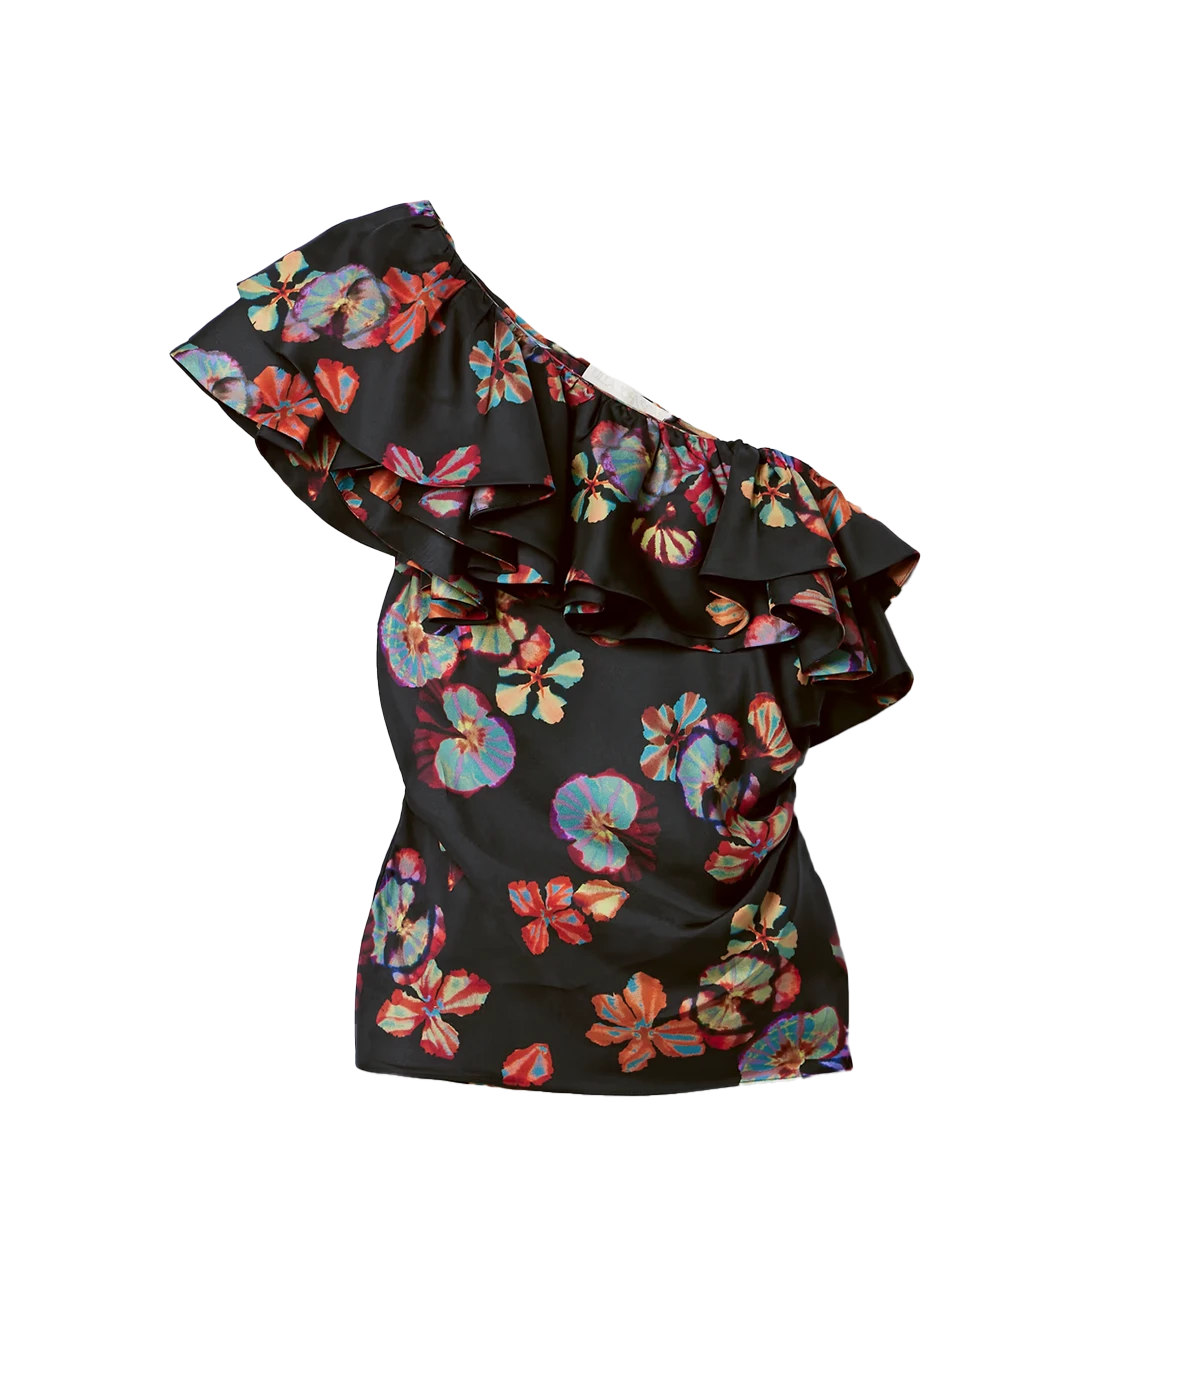 one shoulder black ruffle sleeve silk top by Ulla johnson with a multicolour floral print.